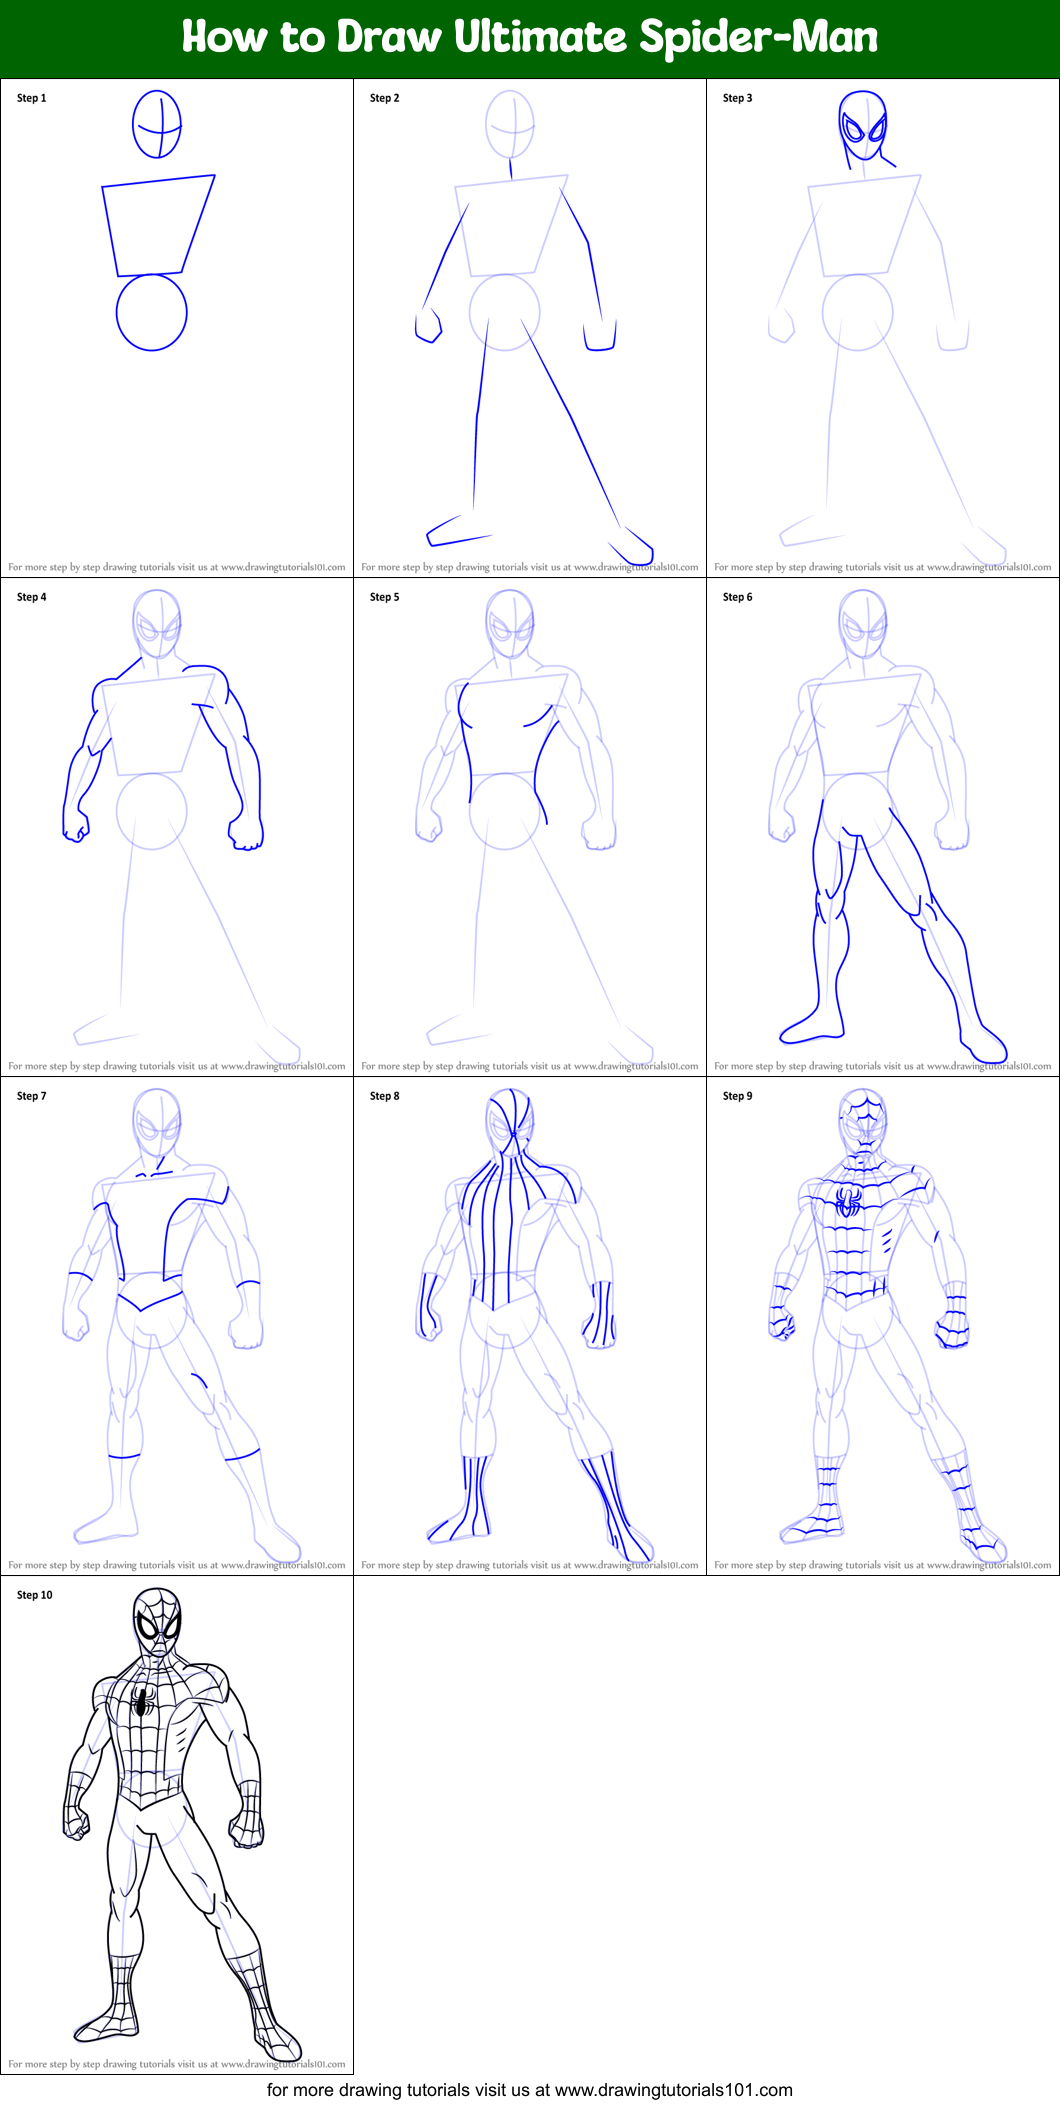 How to Draw Ultimate Spider-Man printable step by step drawing sheet